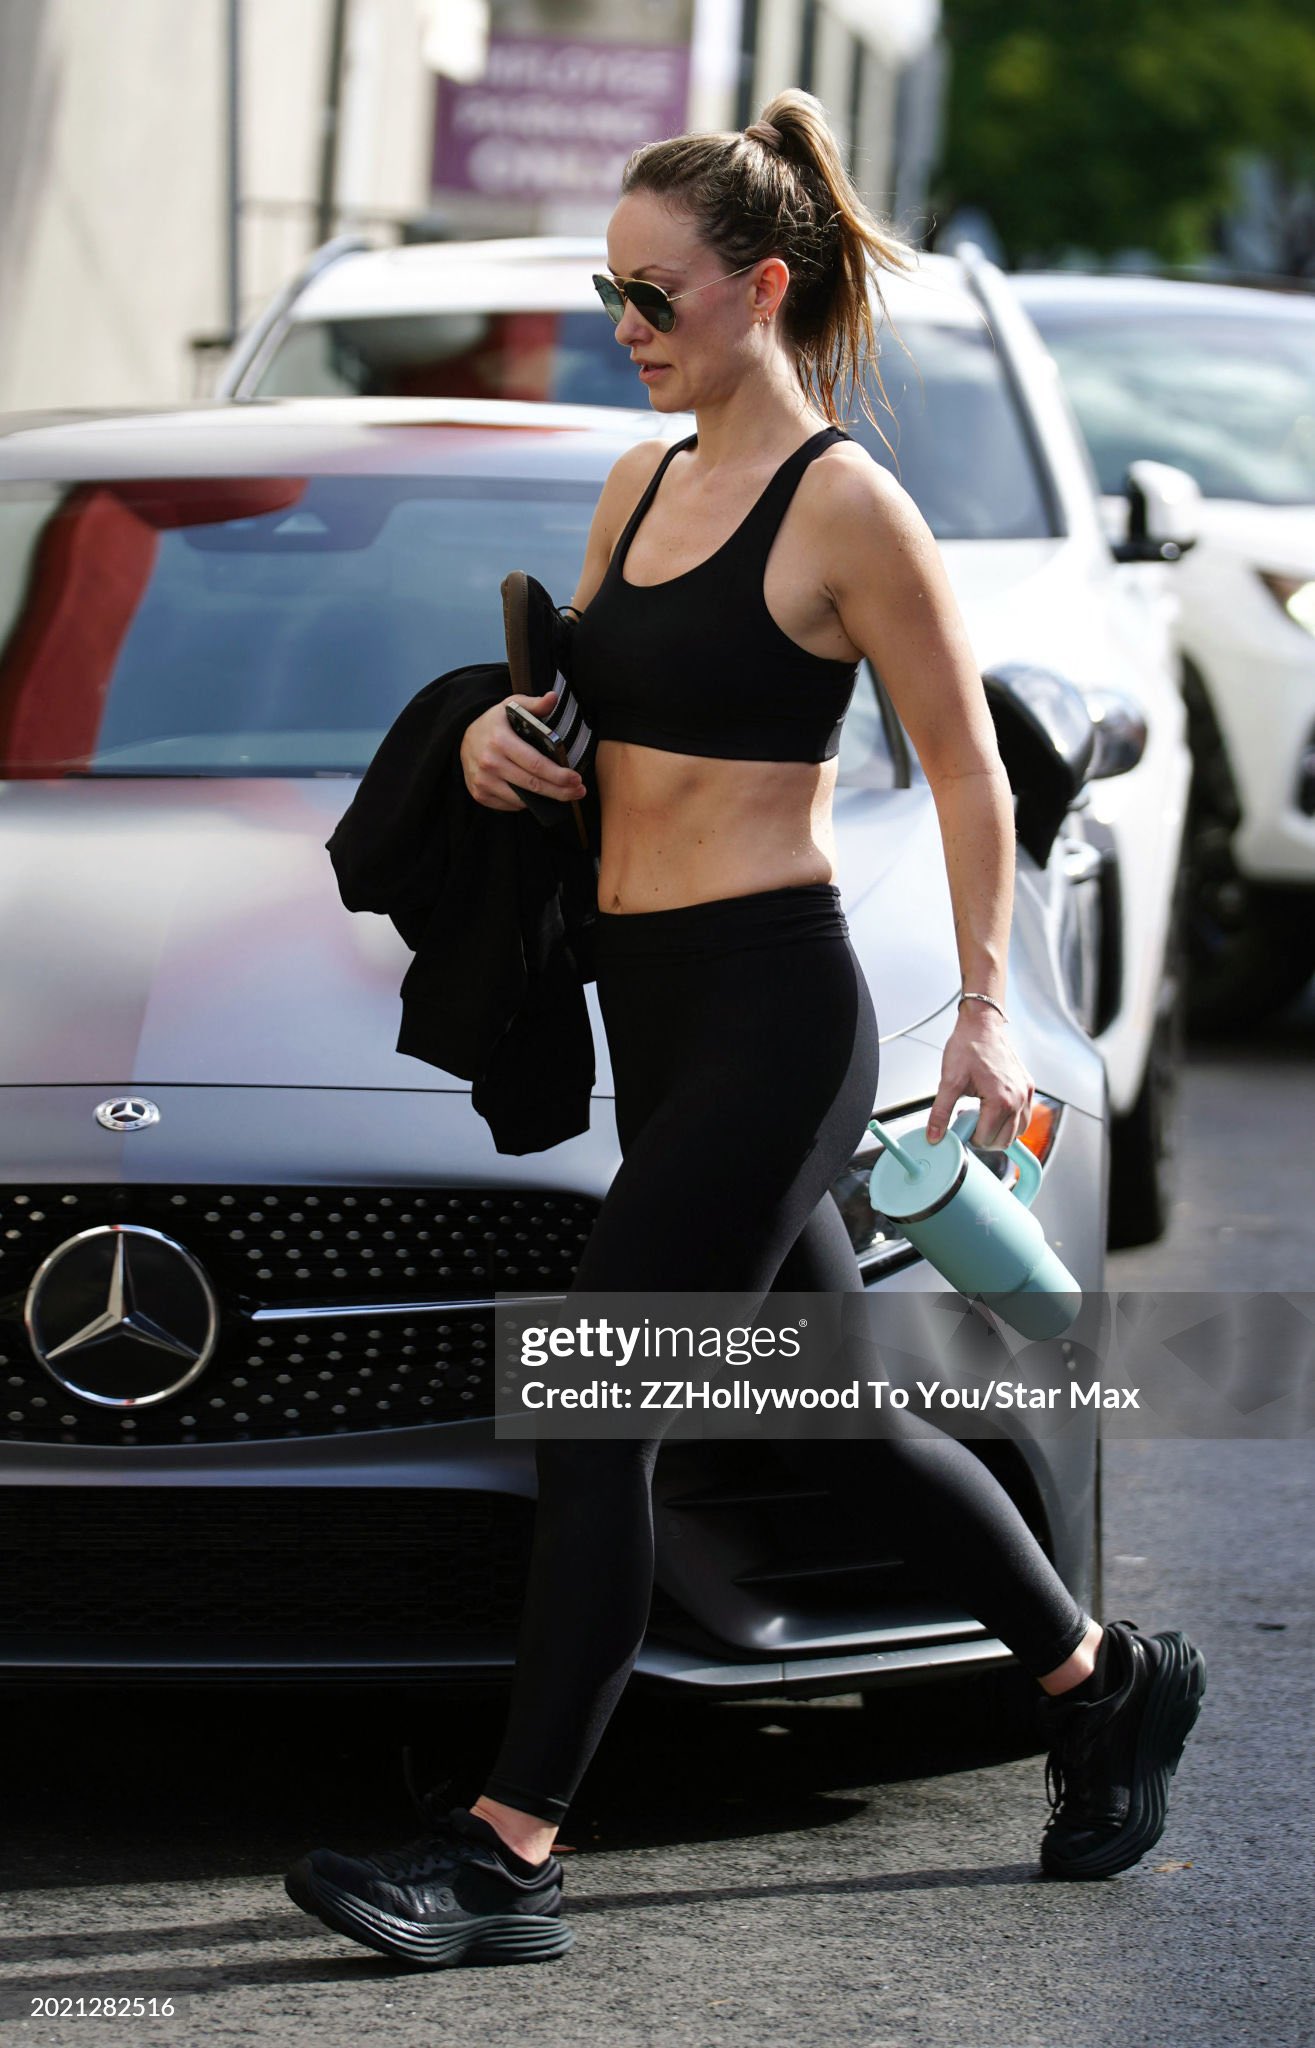 Olivia Wilde sports a black crop top and leggings as she leaves